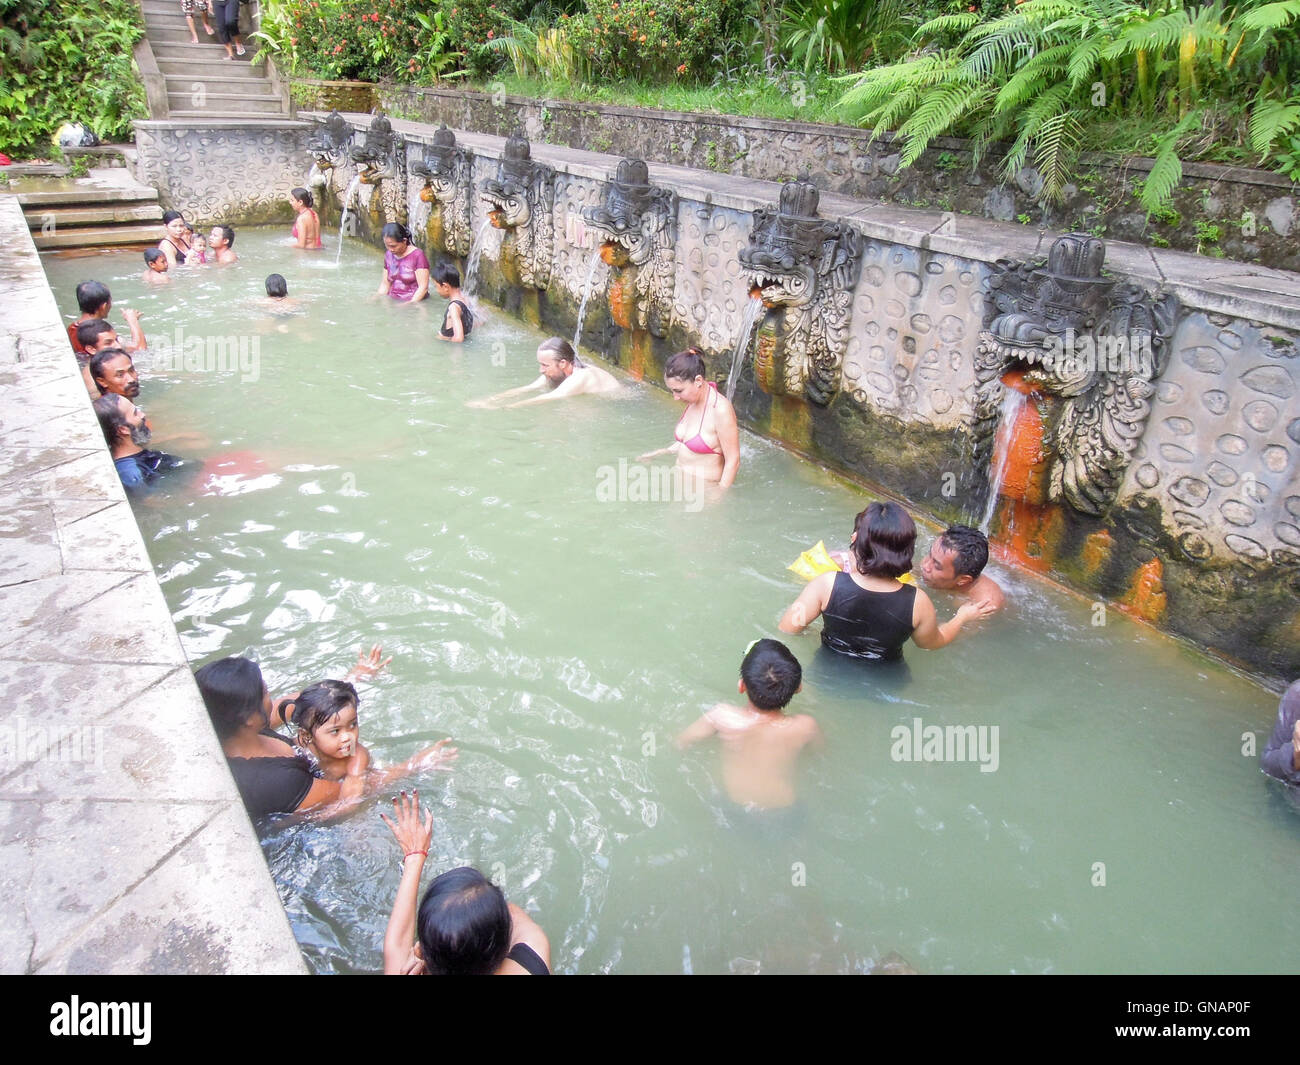 Banjar (Bali), Indonesia - 8 february 2013: People under the water jets of the public pool at Banjar on the island of Bali, Indo Stock Photo